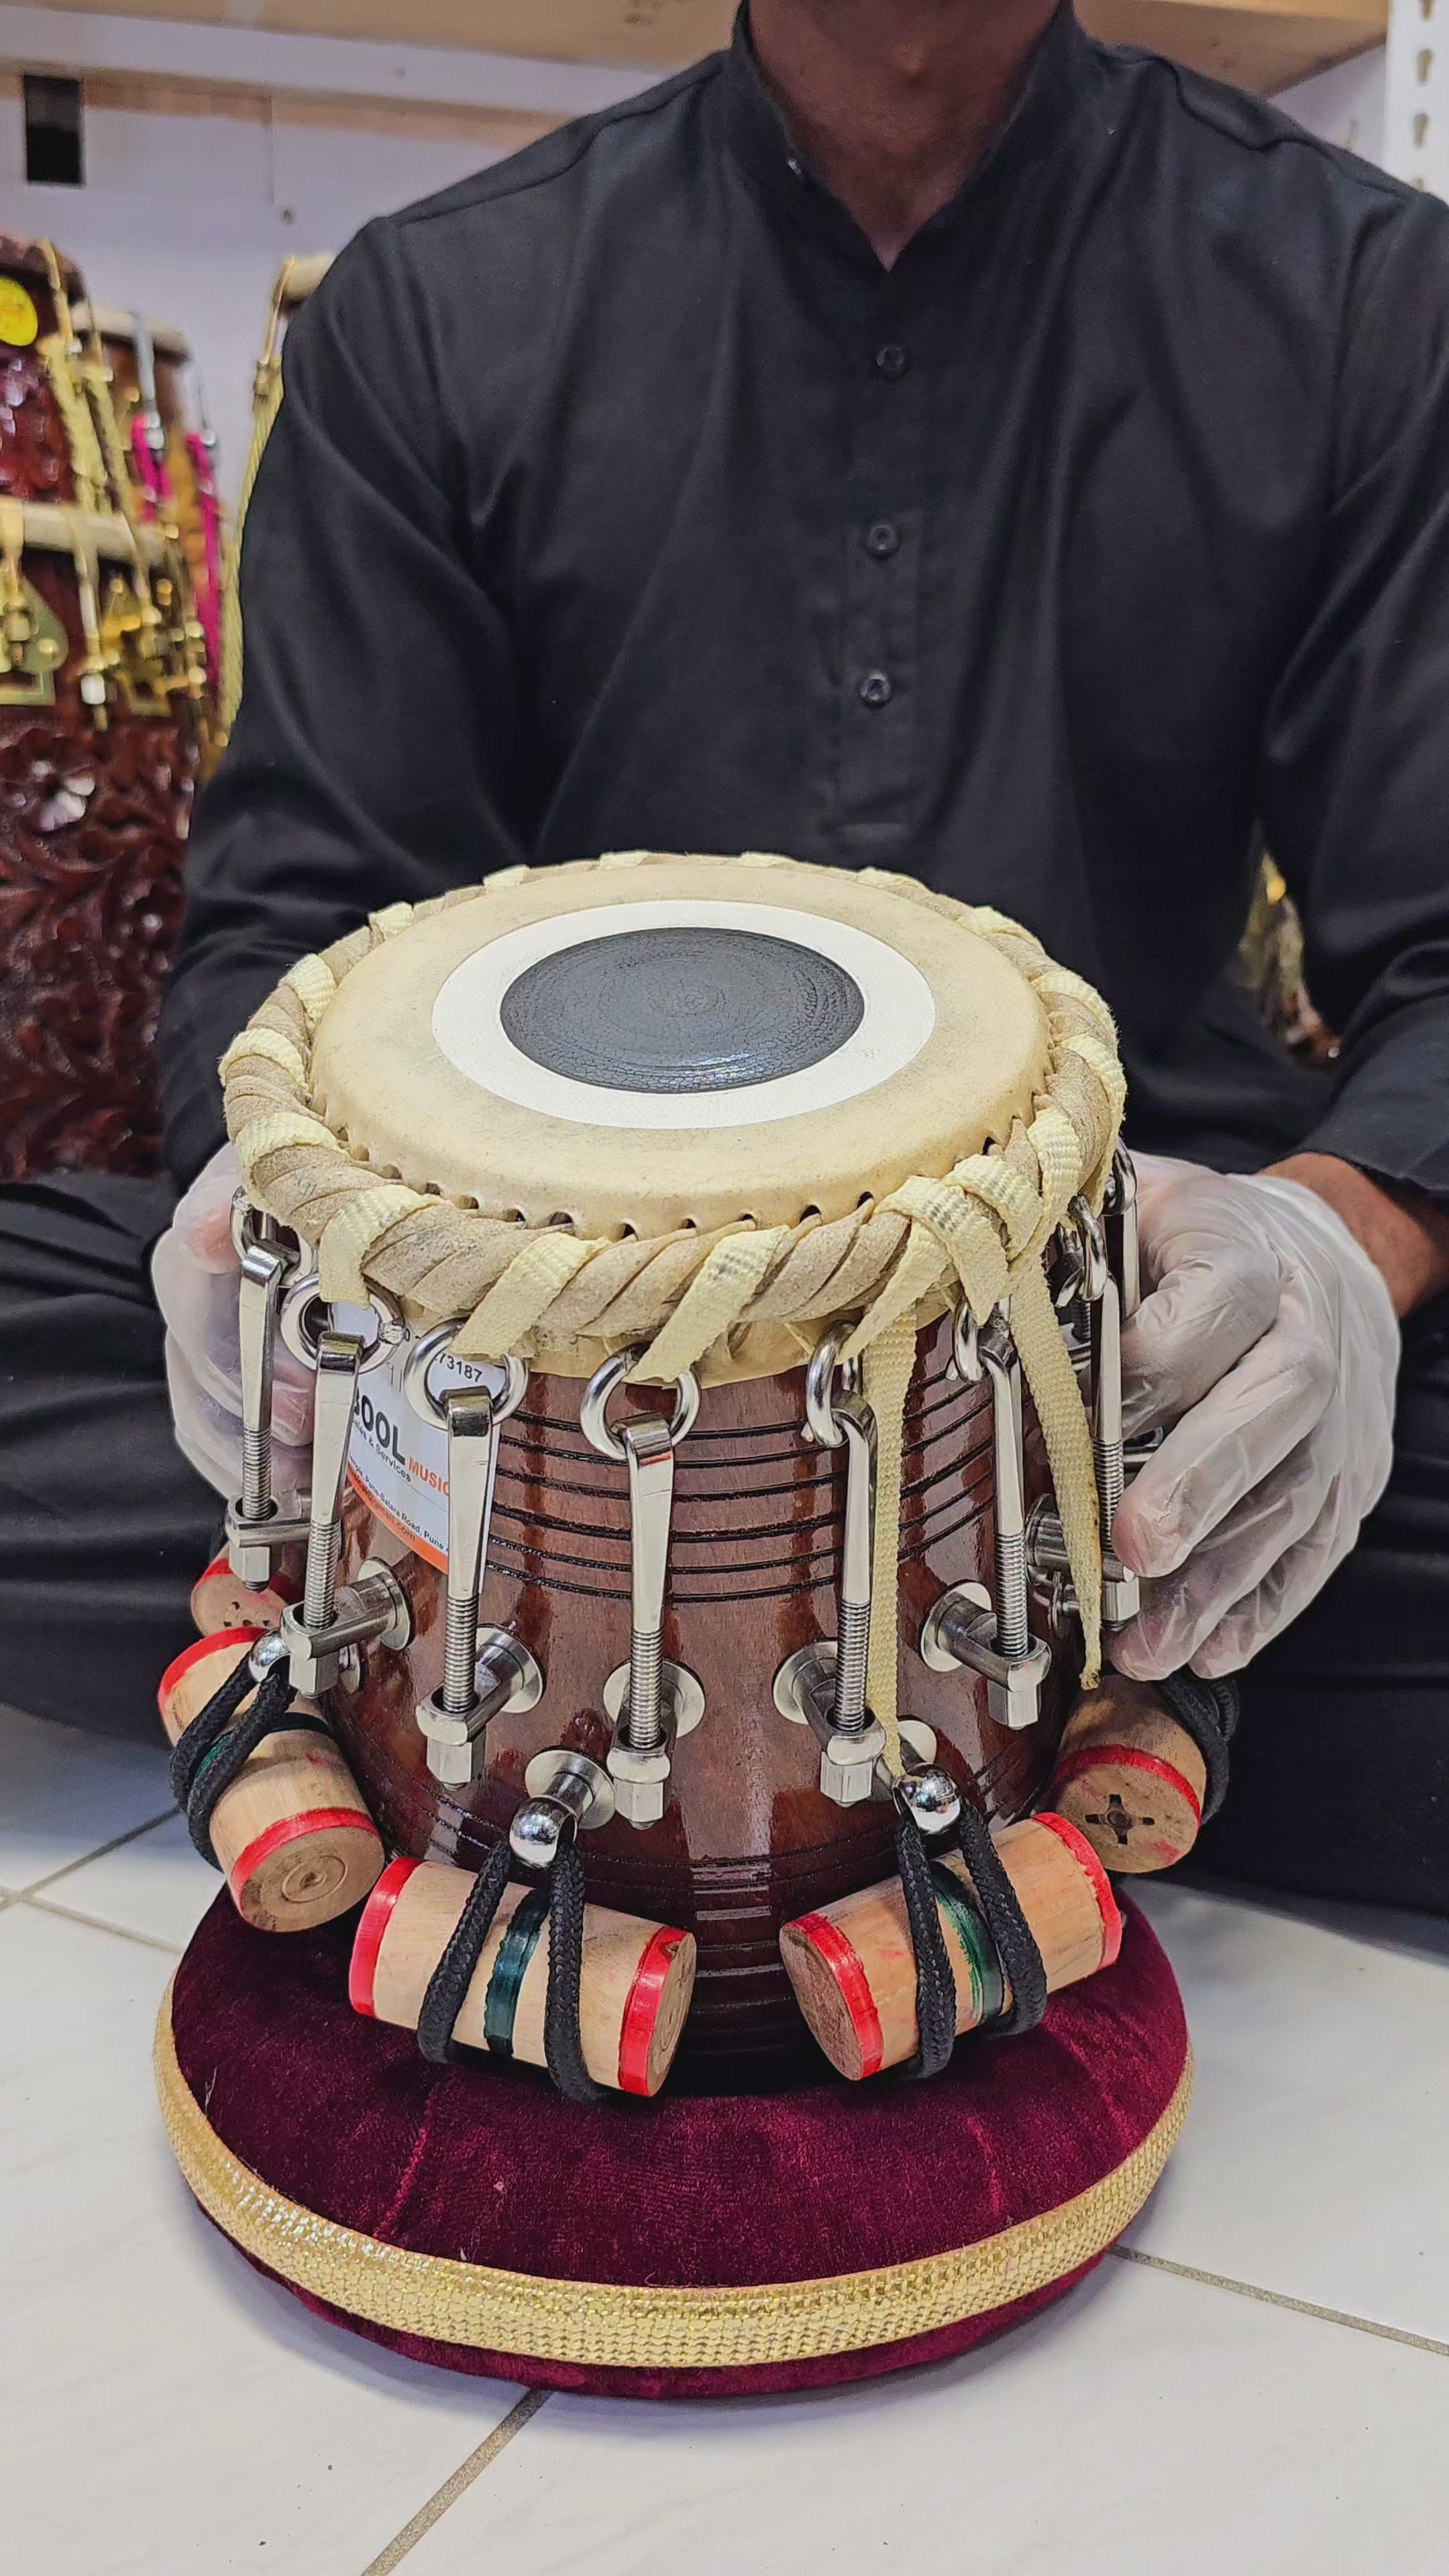 Sonic Craft 5.5" Nut & Bolt Red Sheesham E/F Dayan Tabla Drum - The Fusion of Elegance and Precision